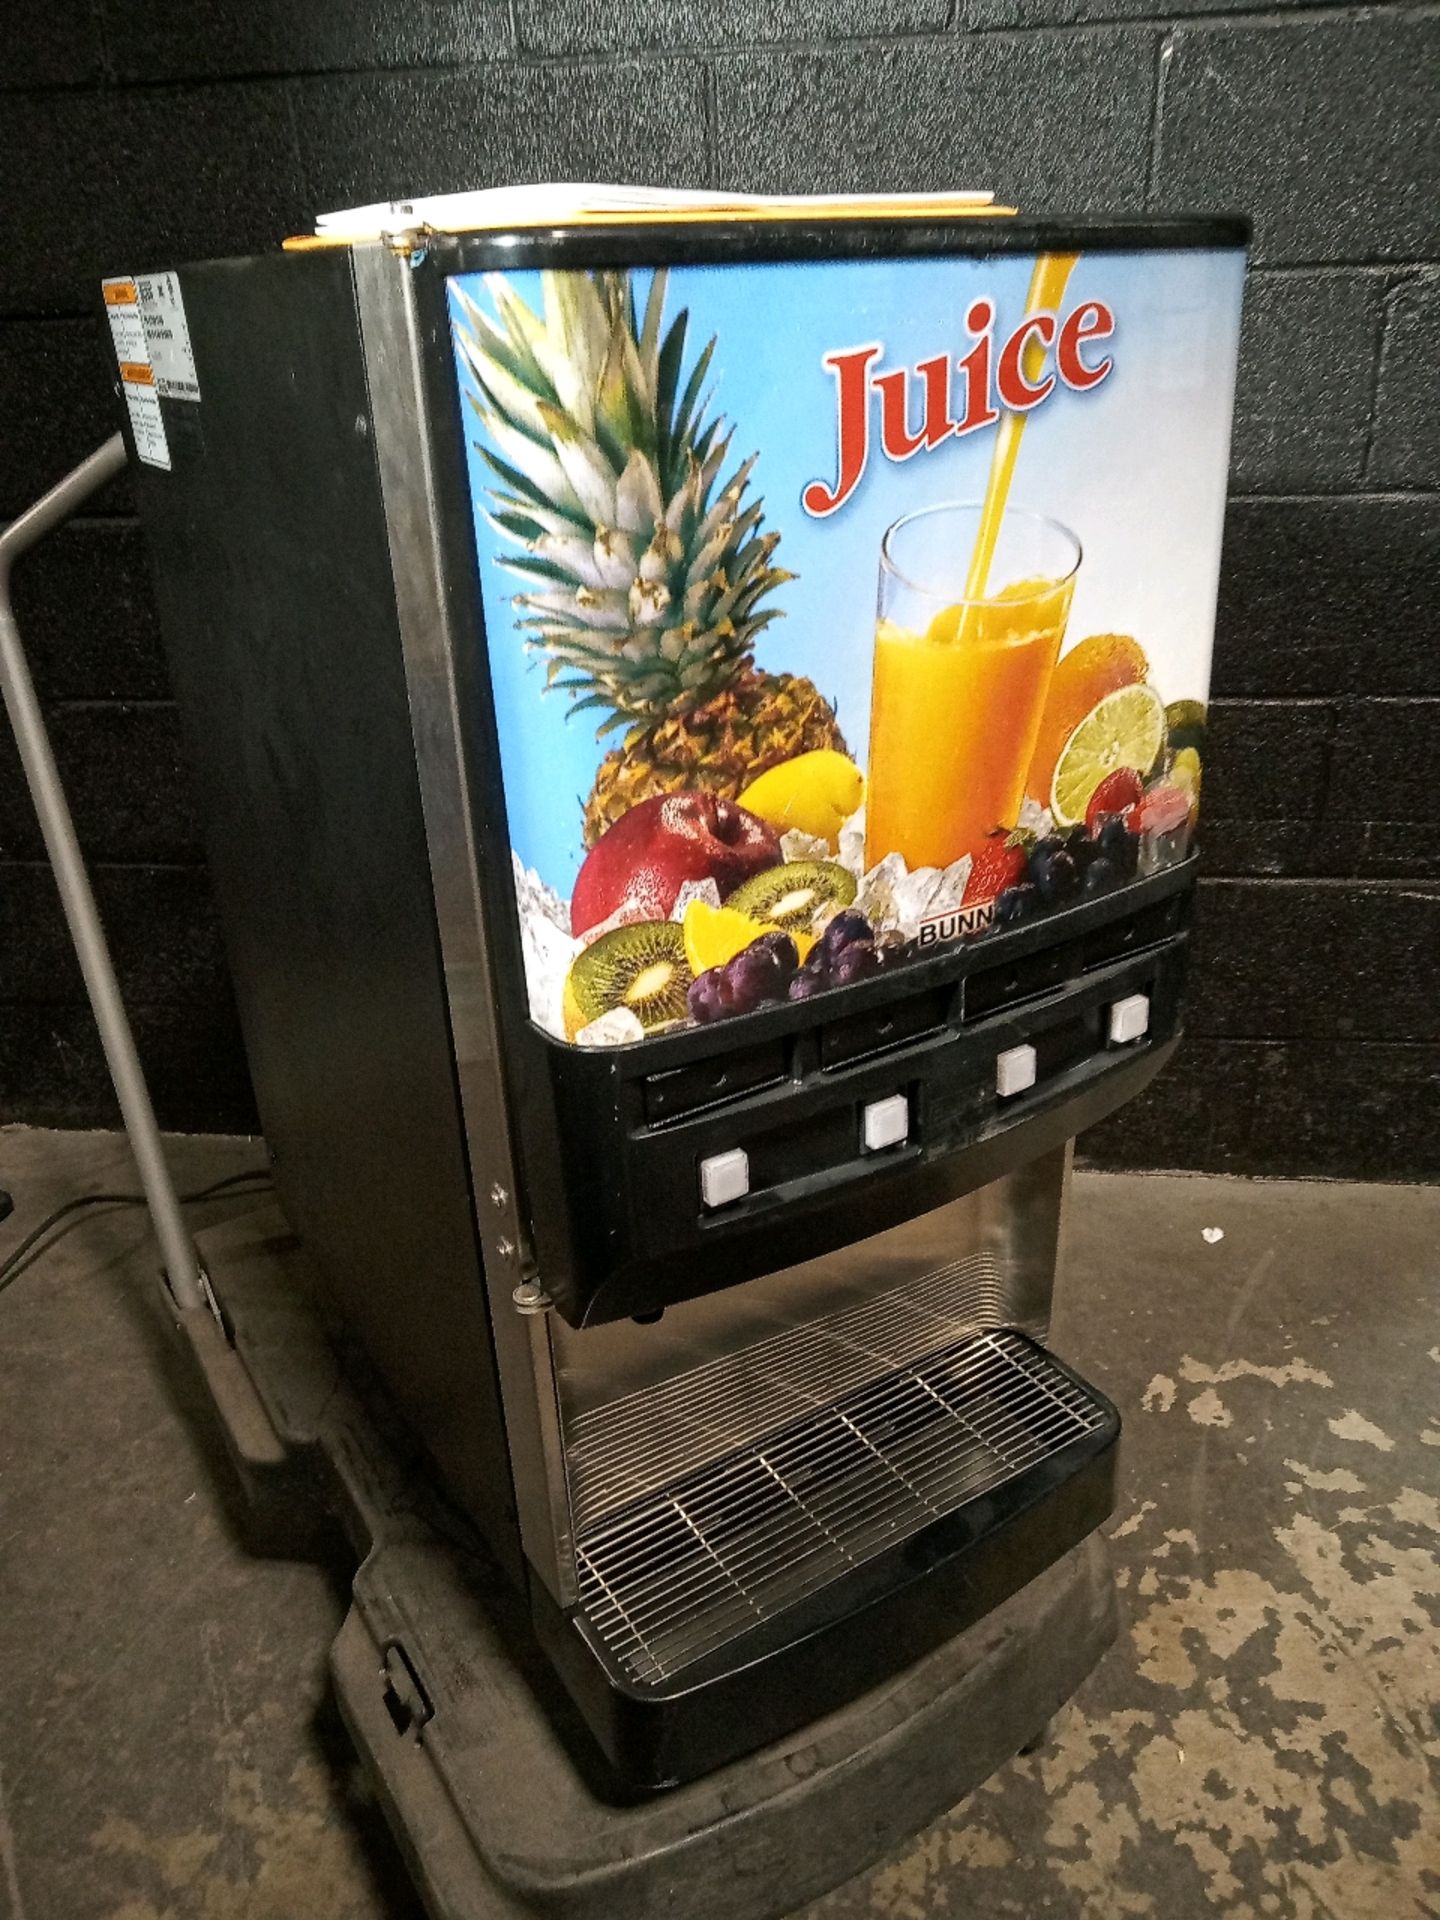 BUNN JDF-4S JUICE DISPENSER, CART NOT INCLUDED (LOCATED AT 151 REGAL ROW STE 231 DALLAS TX, 75247)